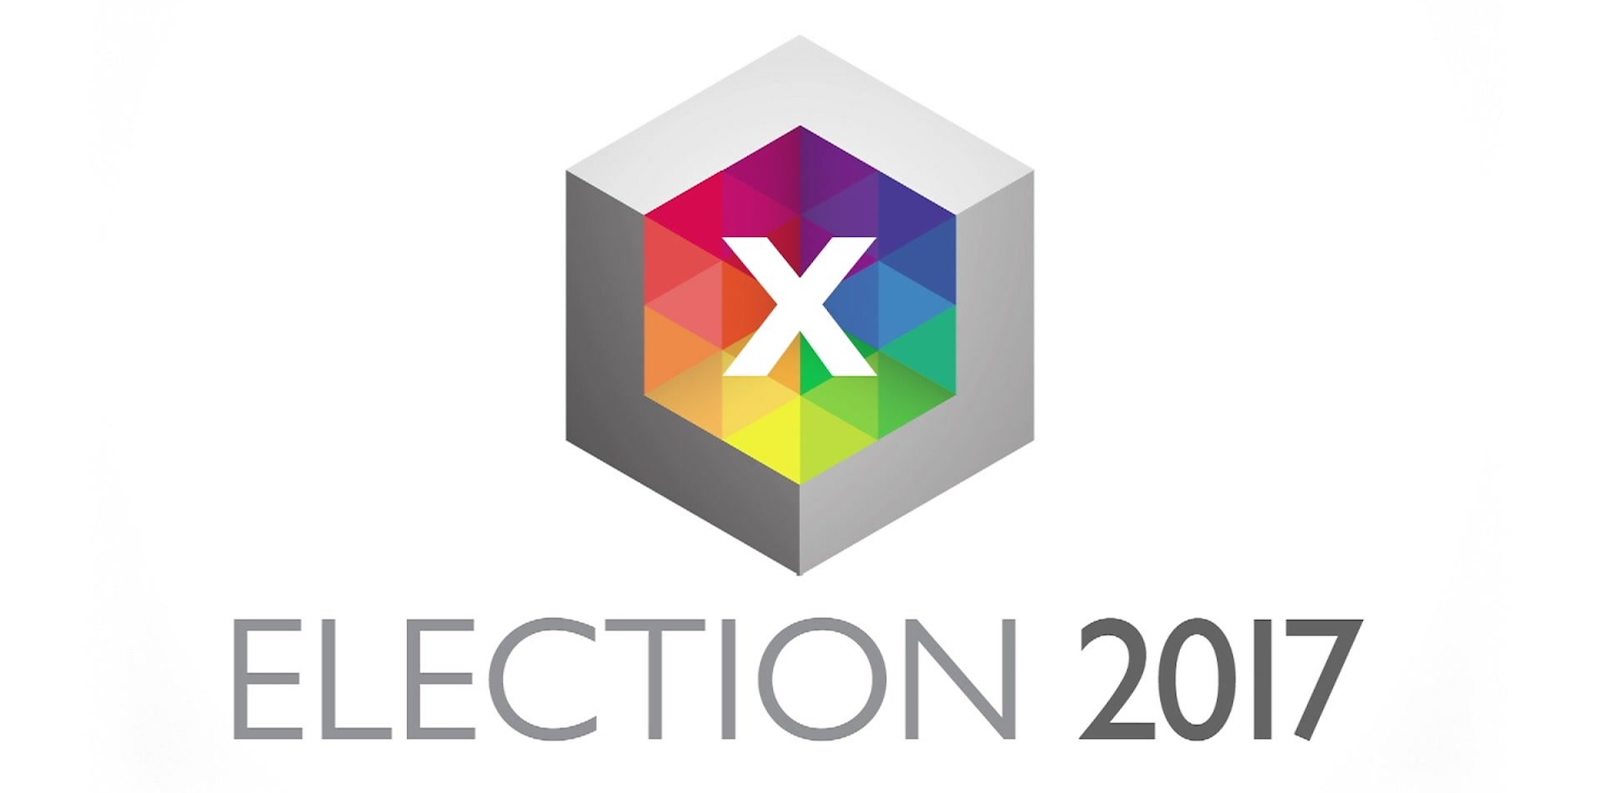 The general election, 8 June 2017